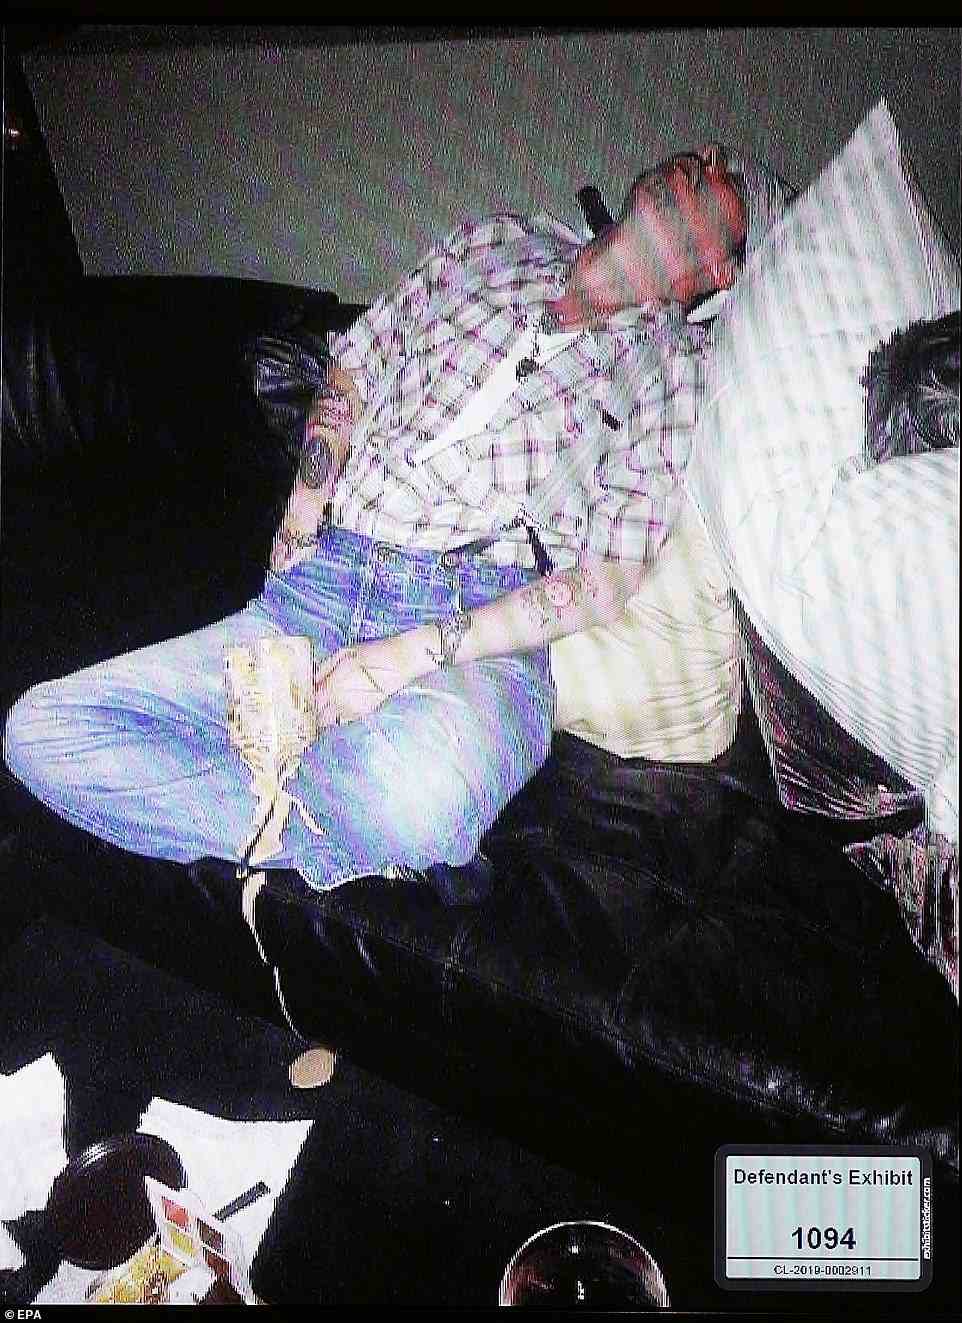 The court was shown evidence of Johnny Depp passed out after a drug and alcohol binge. Amber Heard snapped the photo